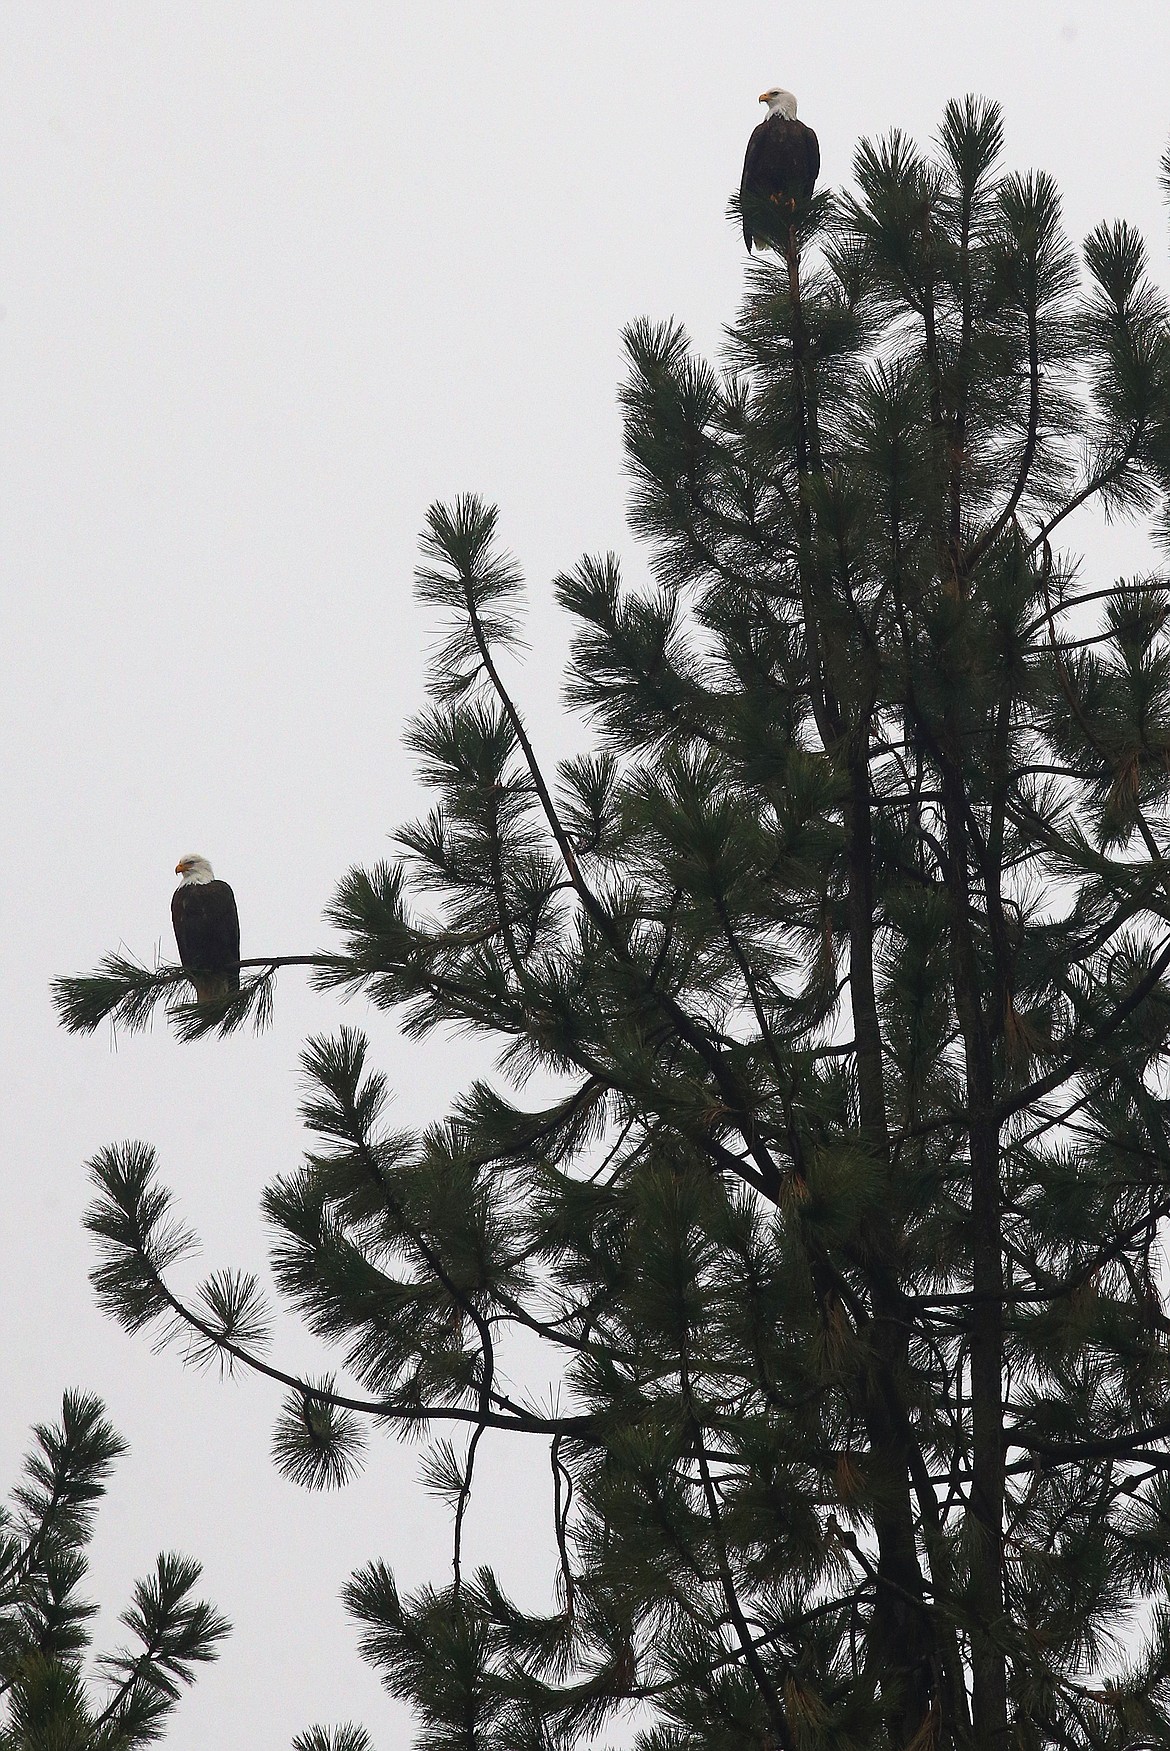 Eagles sit on branches overlooking Lake Coeur d'Alene.